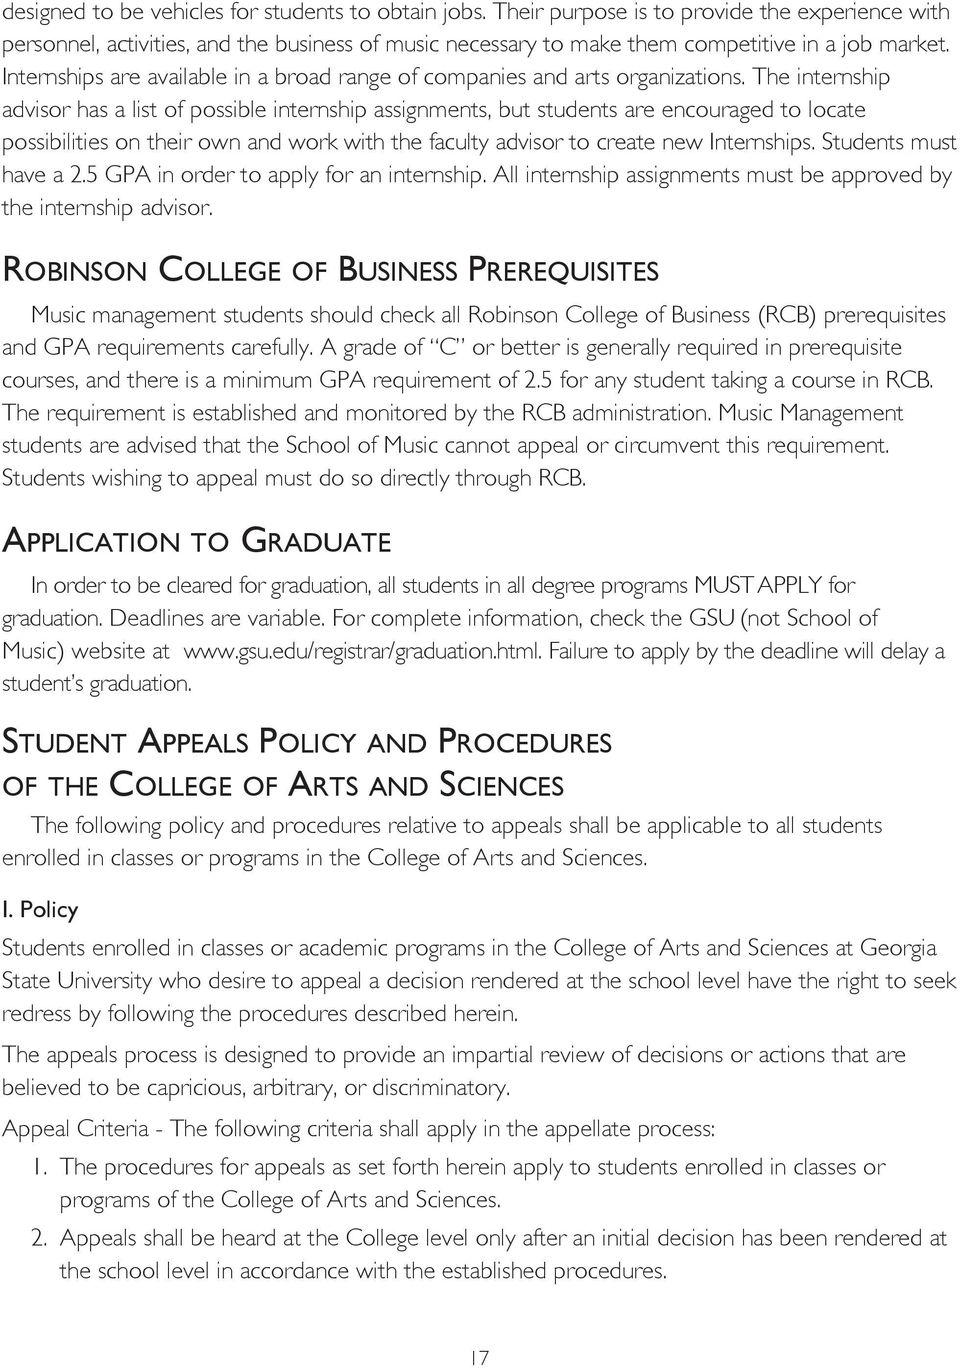 Internships are available in a broad range of companies and arts organizations.